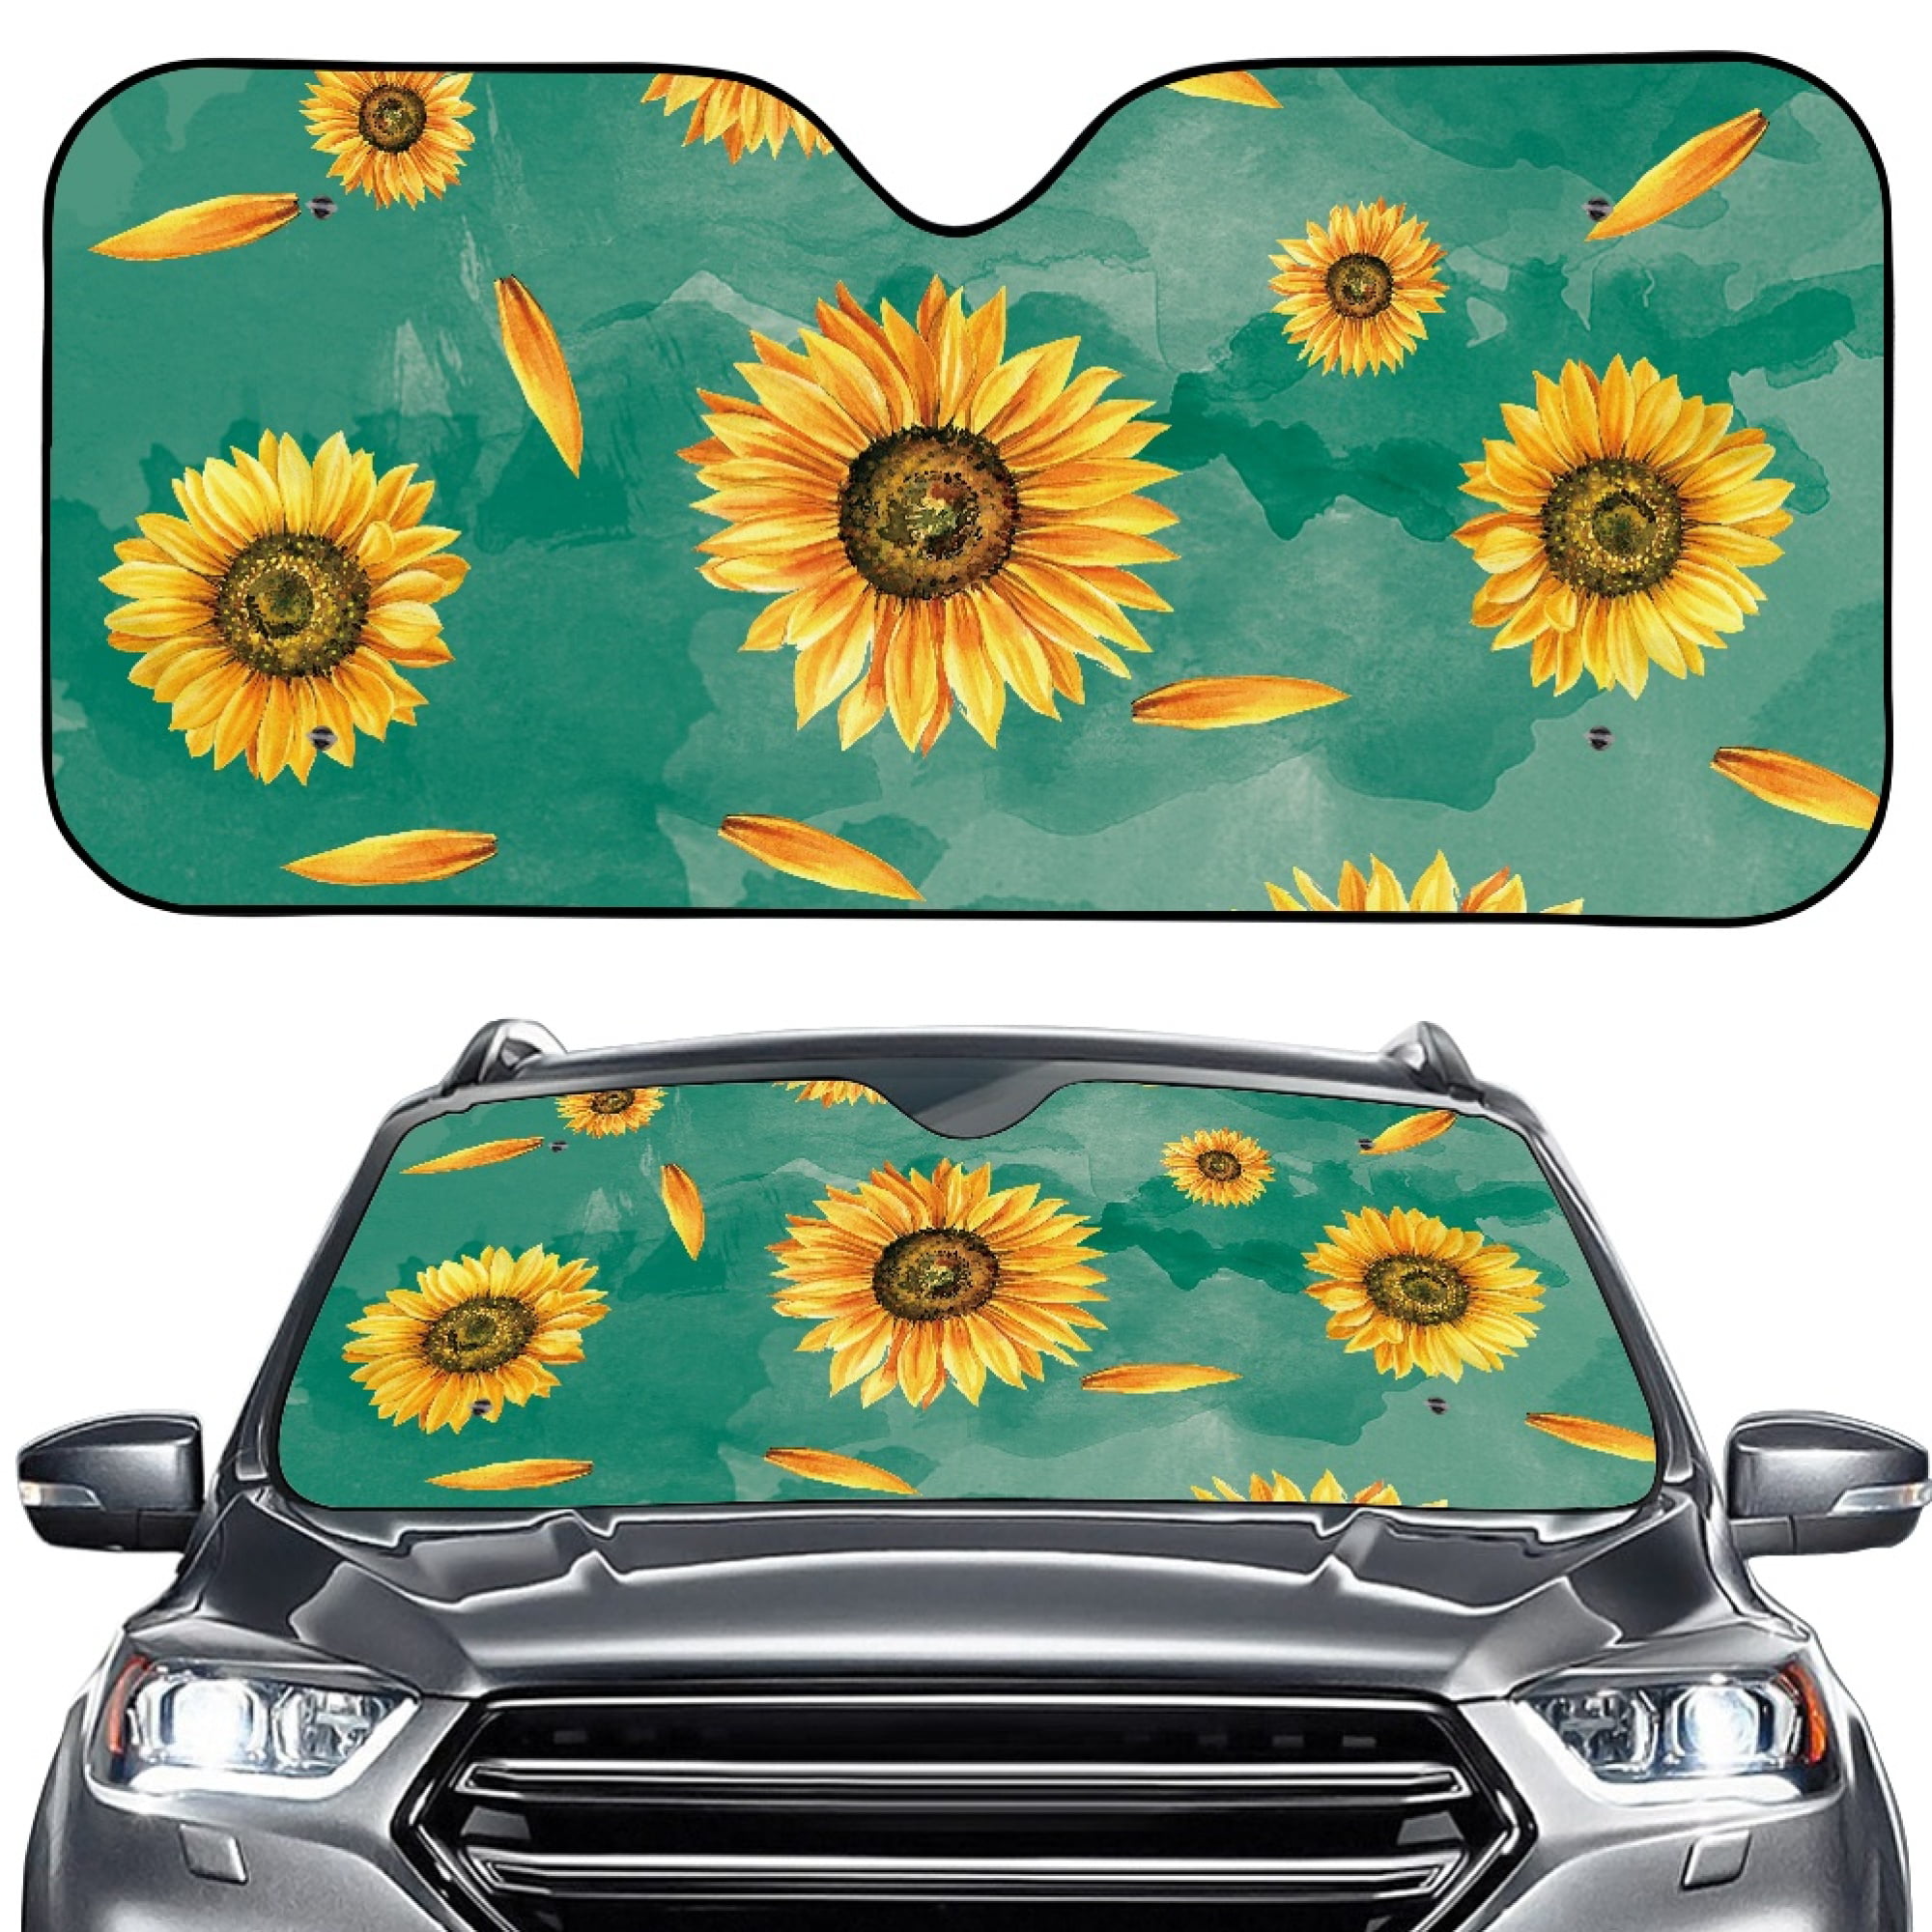 Bivenant Store Sunflower Windshield Sun Shade, High-Resolution Car Sun  Shield with Mirror Cut-Out for Automotive Interior Sun Protection Heat  Reduction, Folding Car Sunshade 